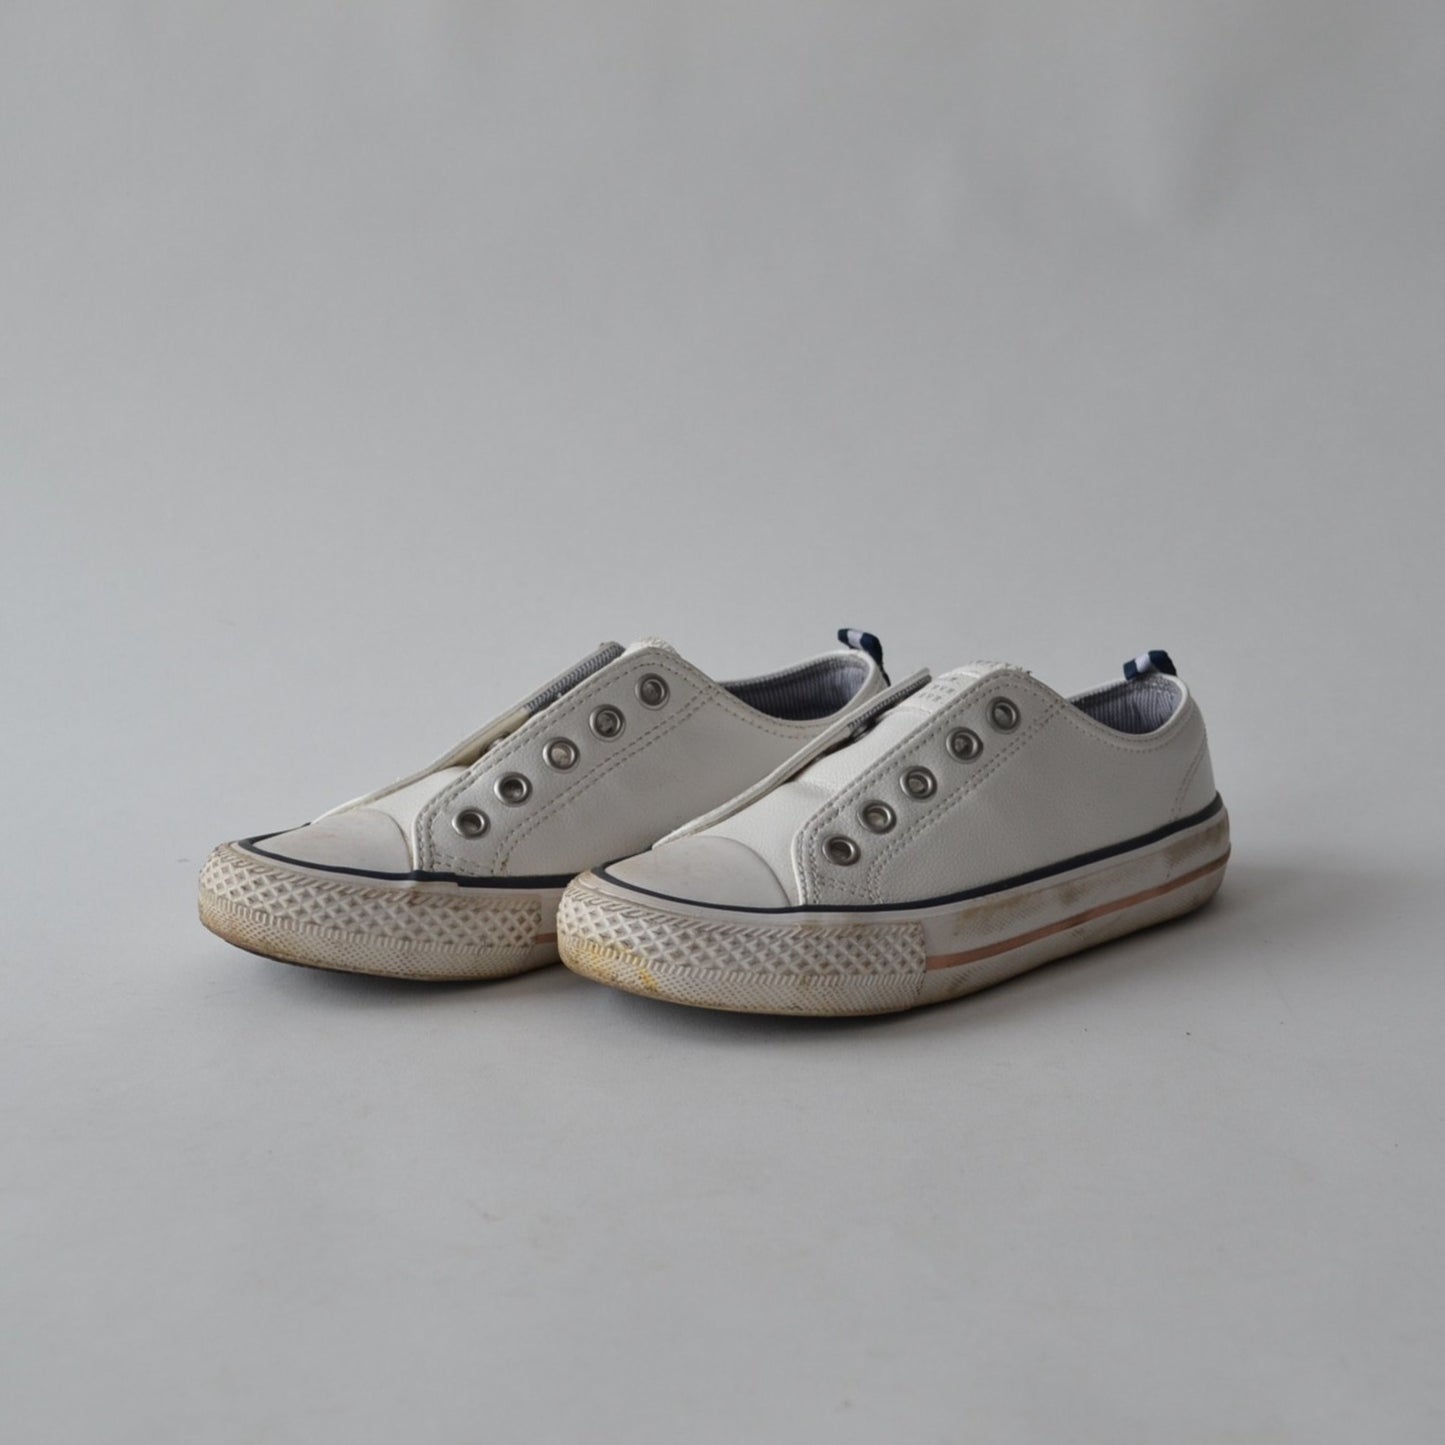 White Trainers Shoe Size 13 (jr)